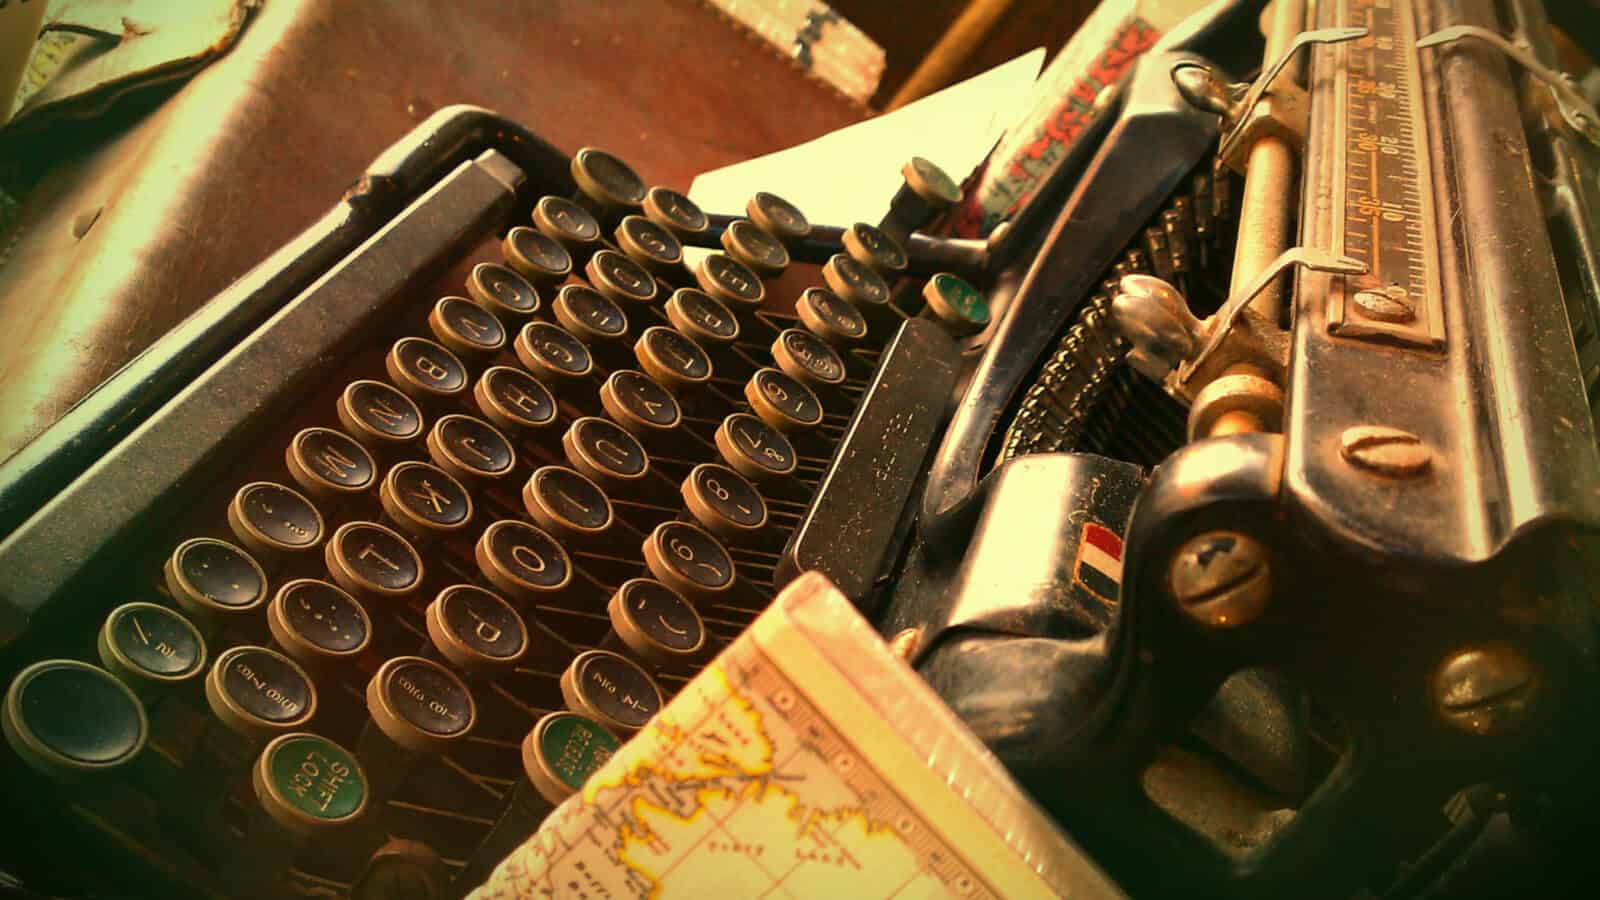 A typewriter reclines on a desk among old maps and books at a stationery shop in Brunswick. Creative Commons courtesy photo